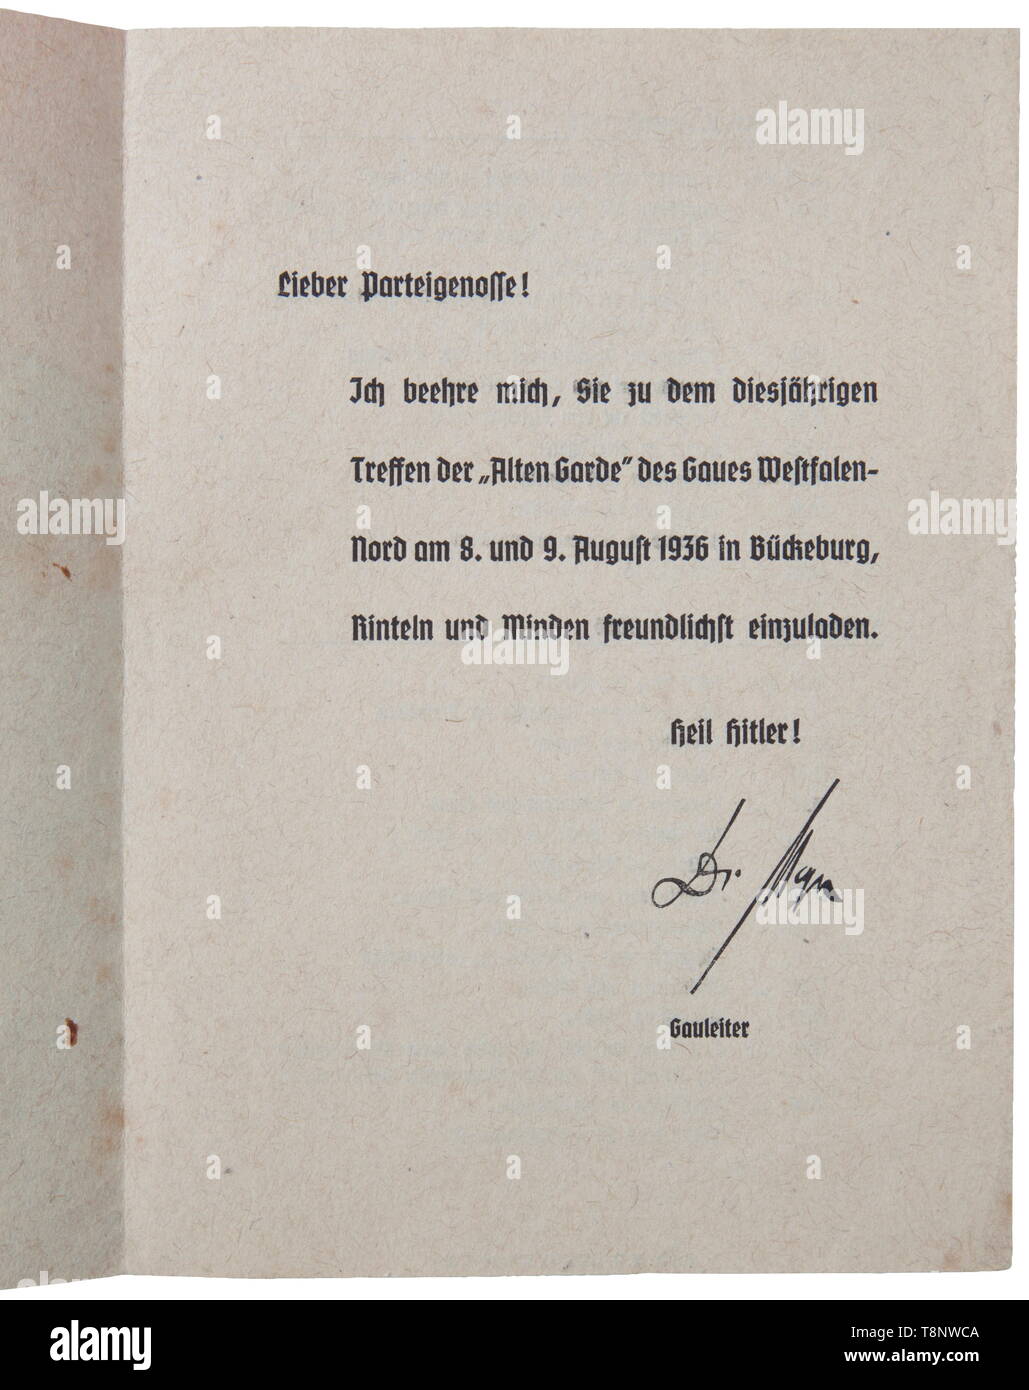 A documents grouping NSDAP Alte Garde Consists of two invitations and one award. The first invitation is for a tour of the Alte Garde (old guard) to Westphalia in 1939, along with itinerary signed by Gauleiter Dr. Ludwig Meier. Parchment with embossed gold party badge and 'Westfalen-Fahrt der Alten Garde 1939' on the cover. Opens to schedule of events. 18 x 22 cm. The second invitation is for a tour of Gau Westfalen Nord 1936 along with itinerary (back page). On cover eagle, swastika and inscription 'Treffen der Alten Garde 1936' as well as a signature by Gauleiter Dr. Ludw, Editorial-Use-Only Stock Photo